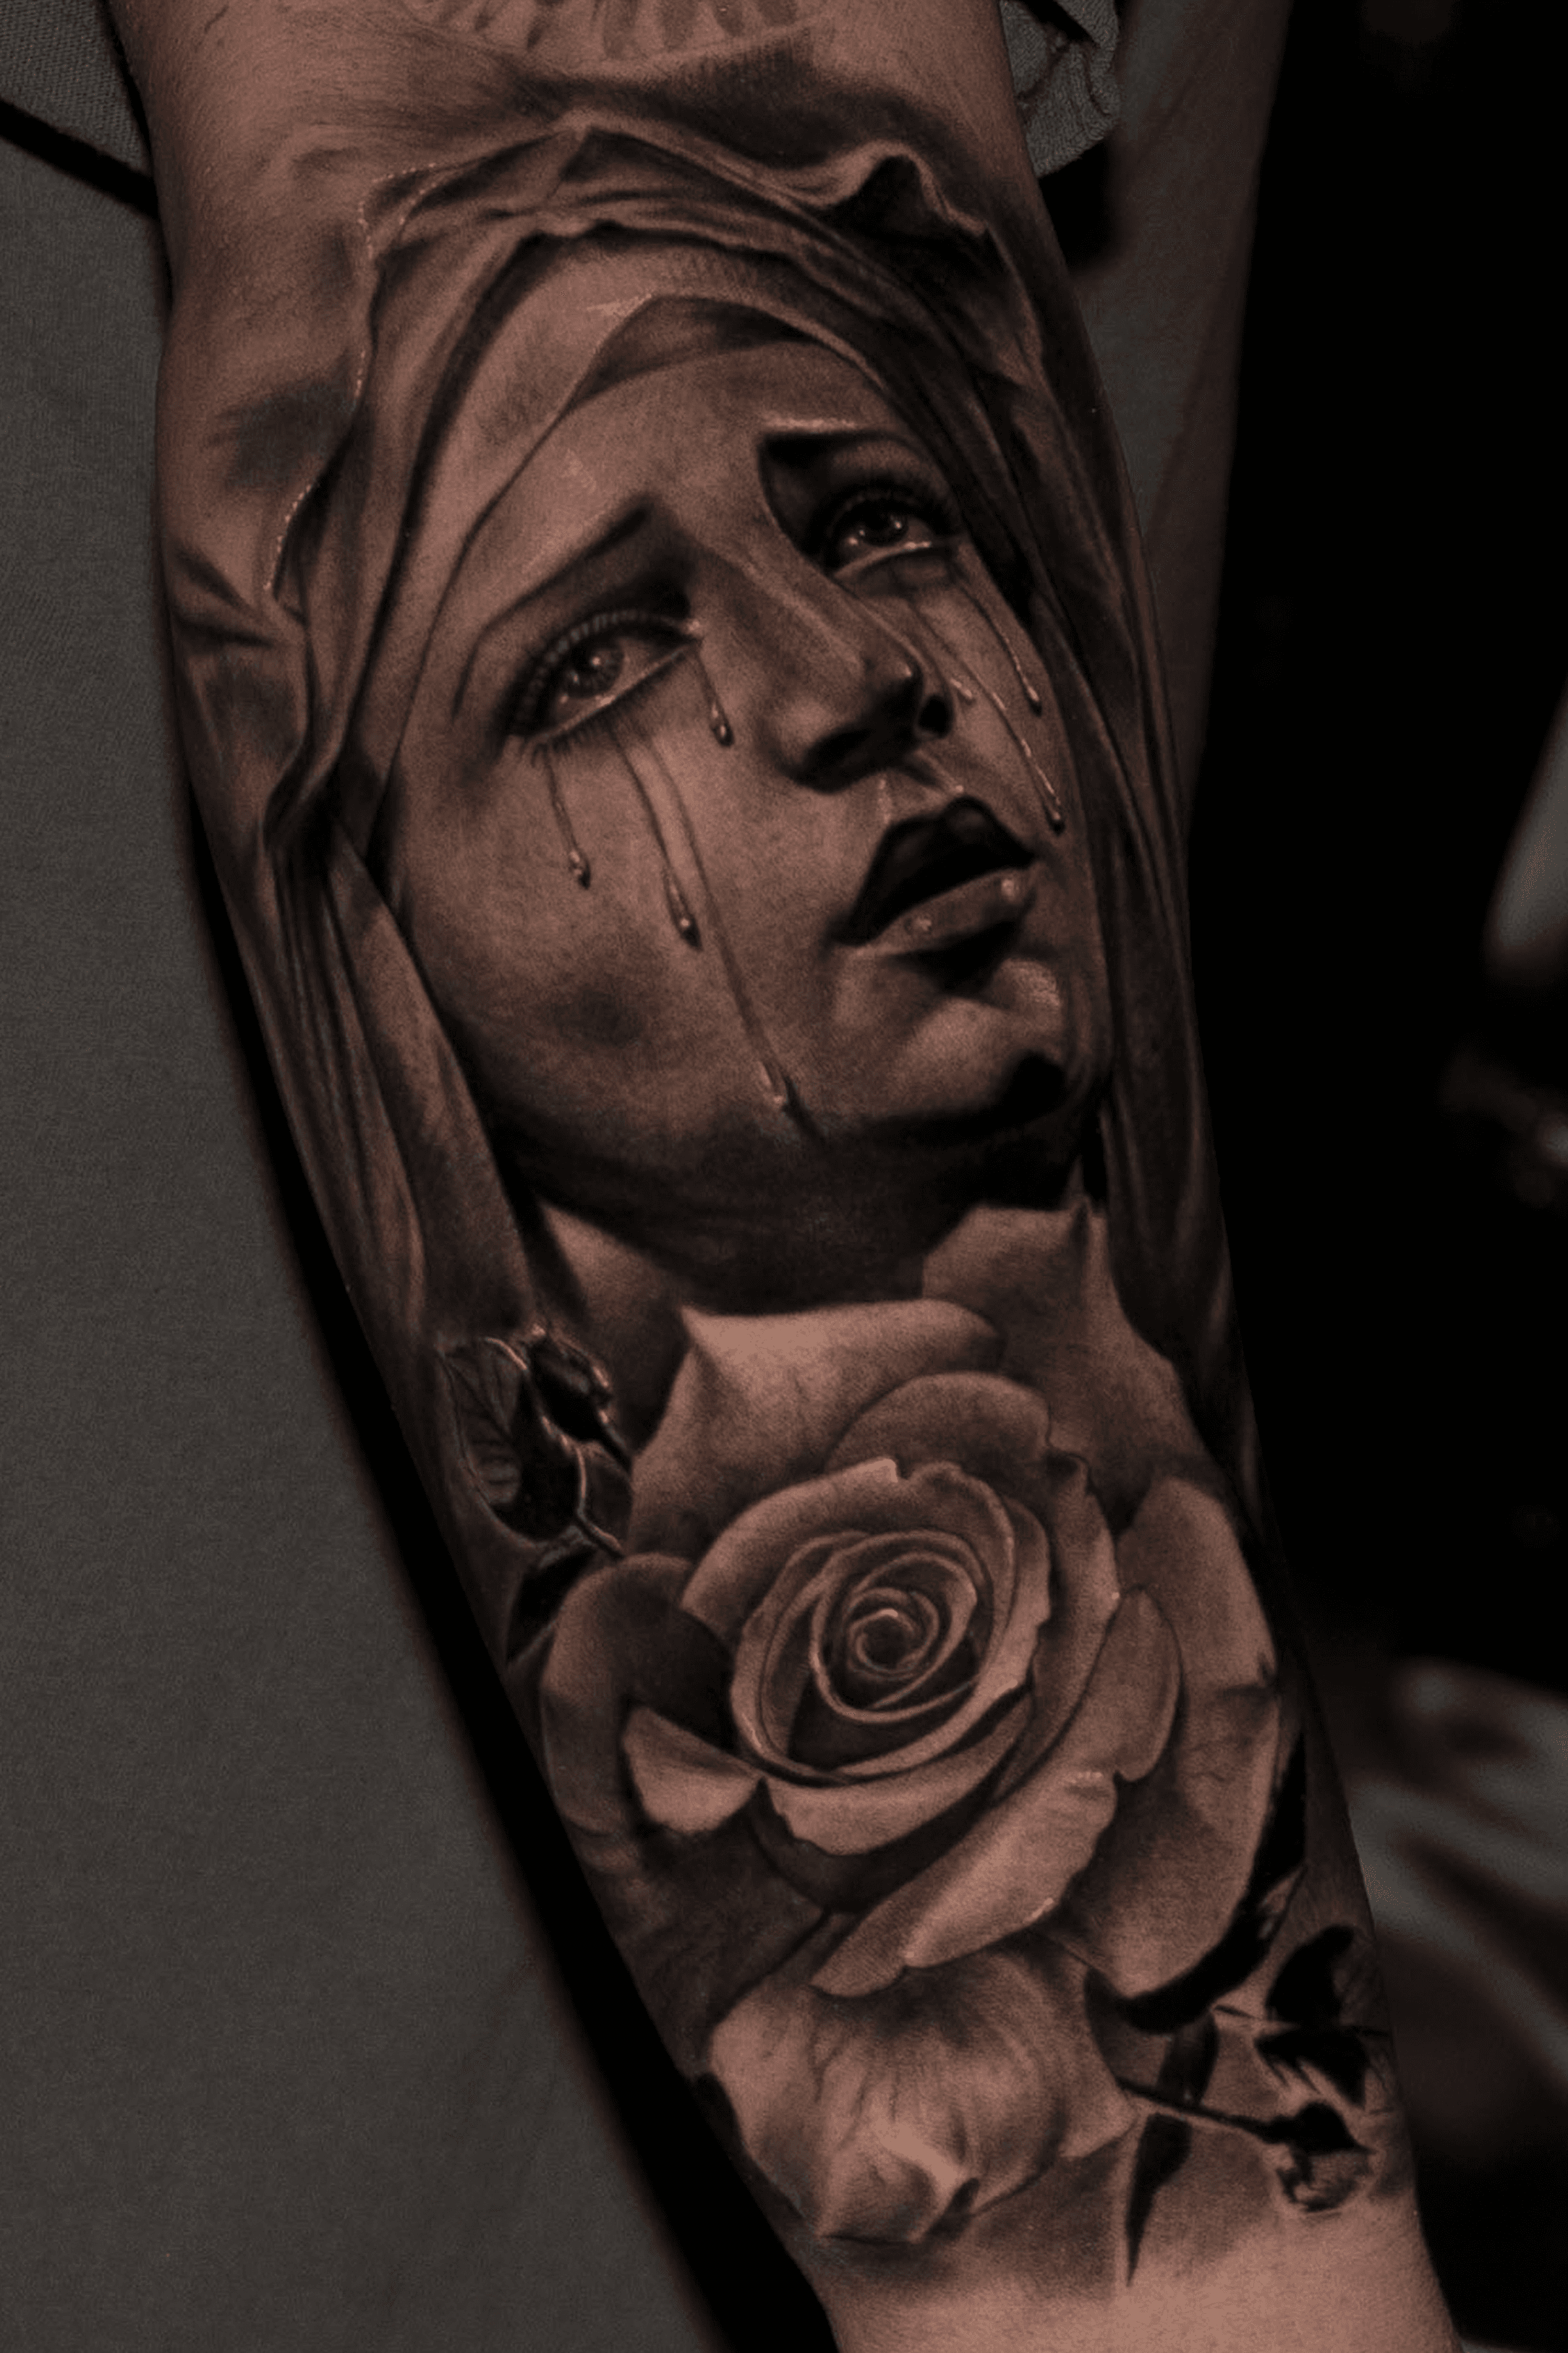 75 Inspiring Virgin Mary Tattoos Ideas  Meaning  Tattoo Me Now